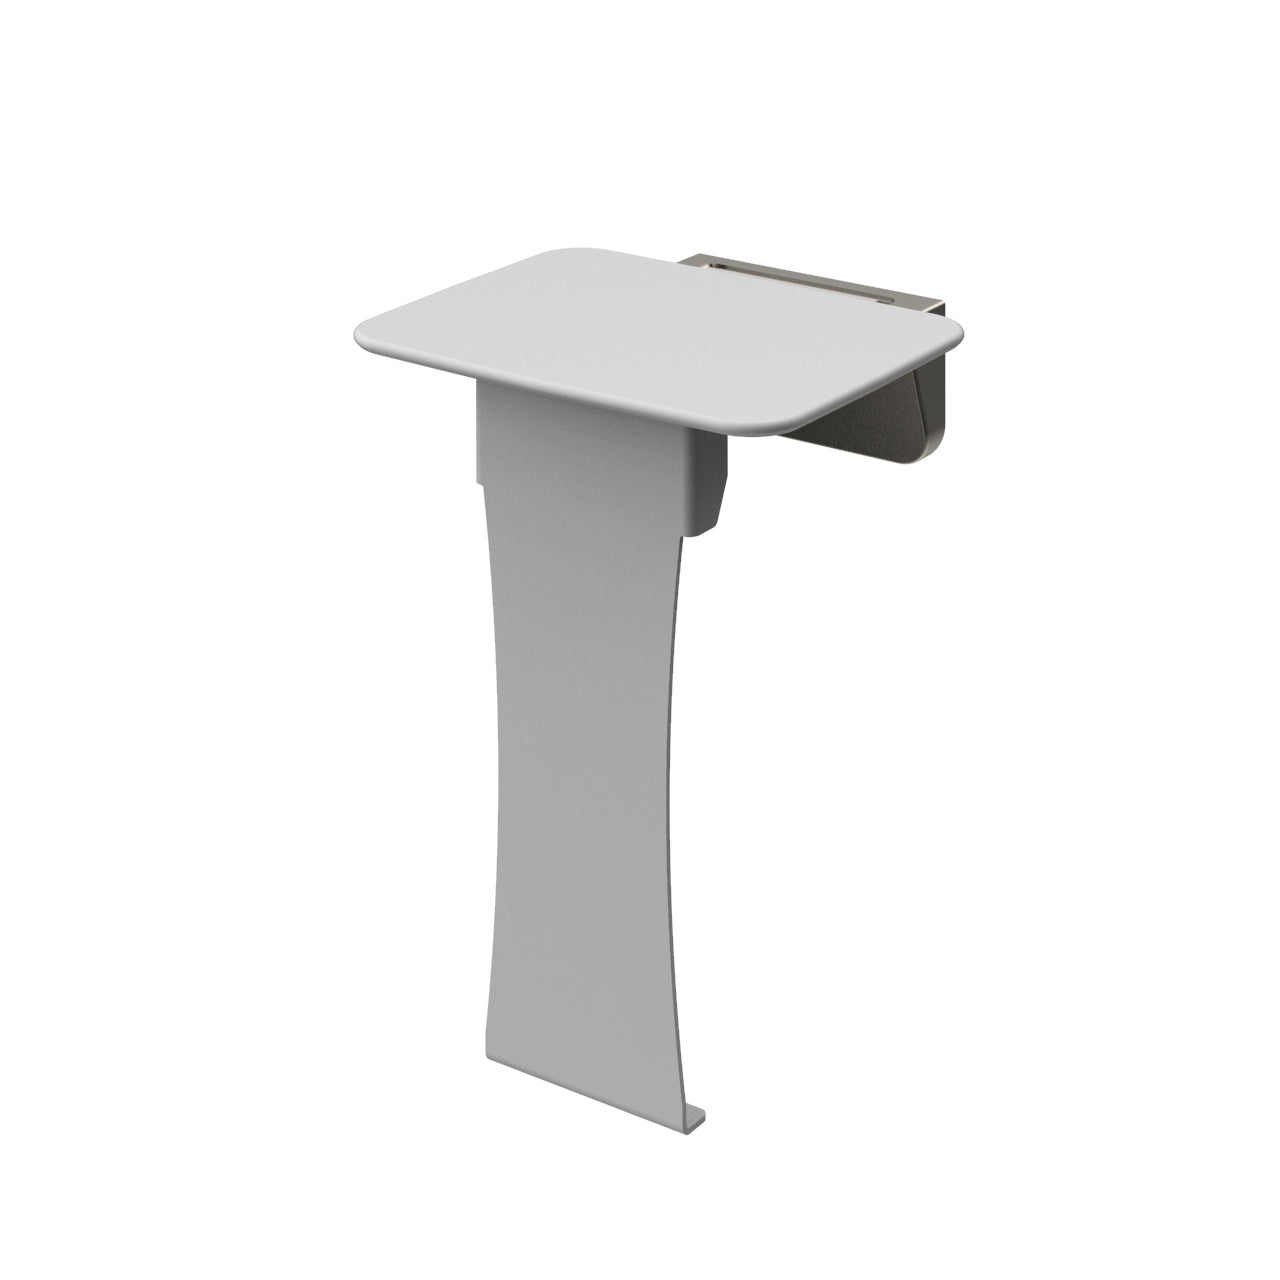 Liberty Shower Seat 350 Wide White With Fold Down Leg Brushed Nickel - S01ALWBN